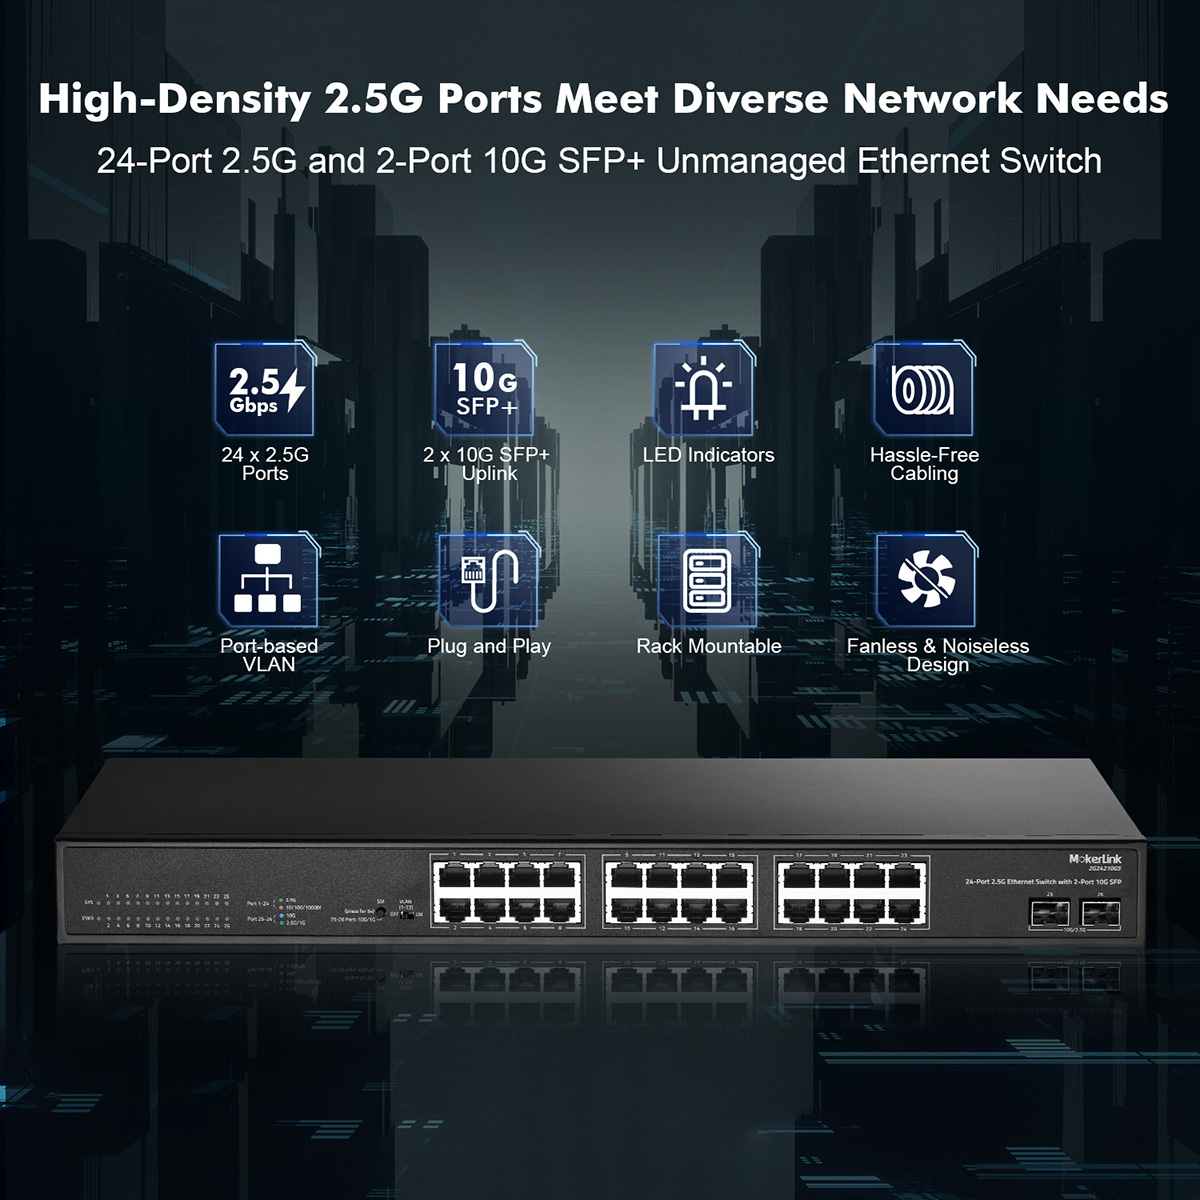 MokerLink Store - MokerLink 8-Port 2.5G Unmanaged PoE Switch with 1-Port  10G SFP+